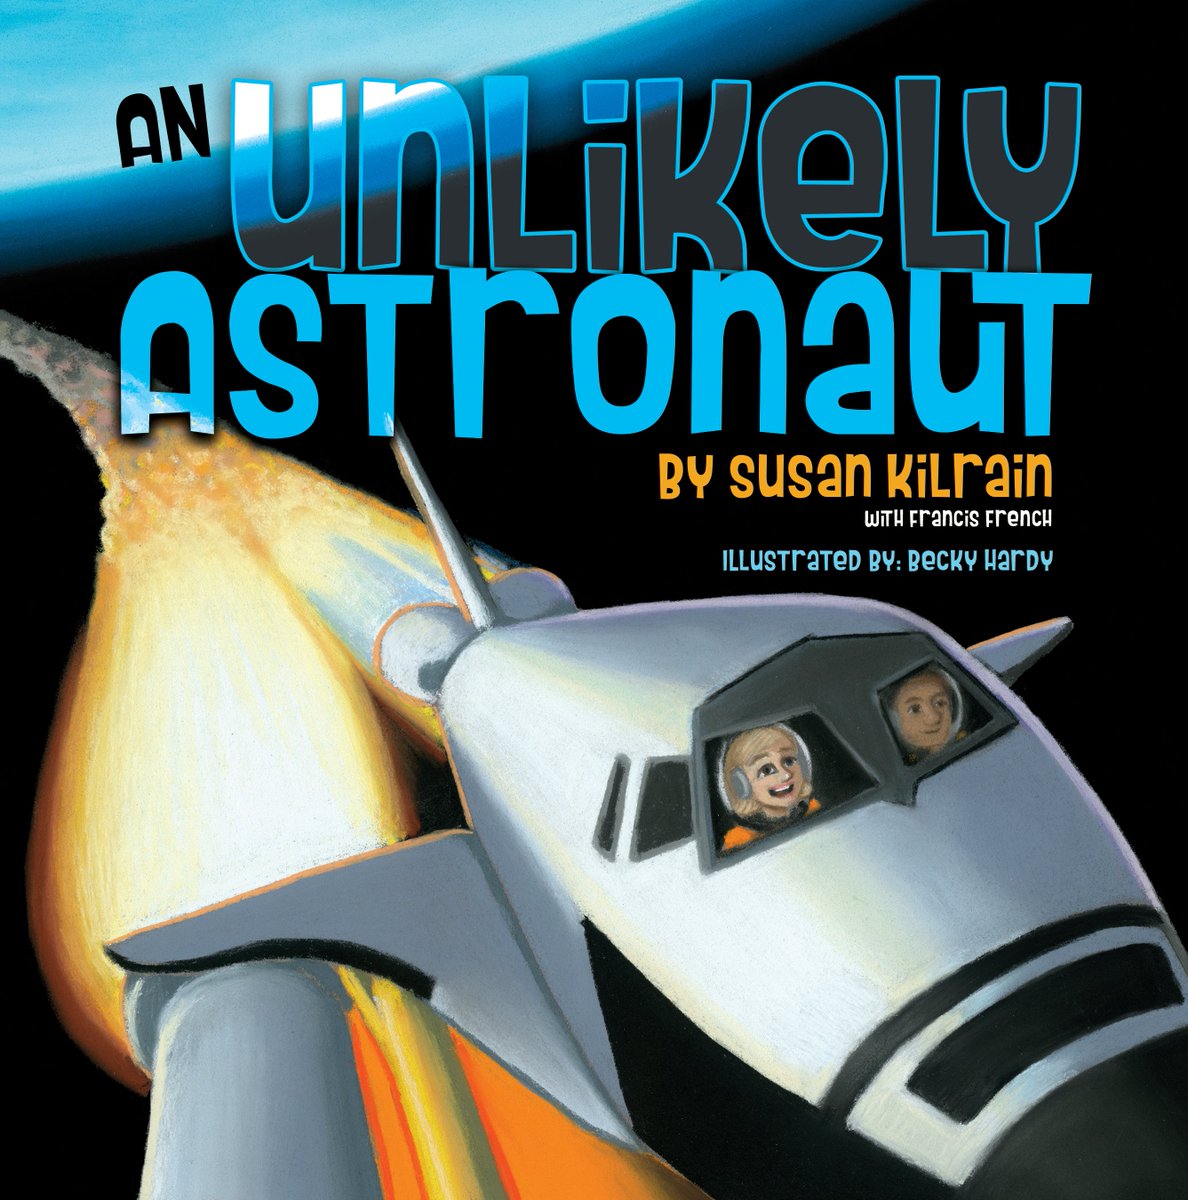 The cover art for my next (co-authored) book has been released. It's an honor to be working with astronaut @Astro_Susan , one of only three women to have piloted the space shuttle, and space artist @artycosmos . Thank you, @AnthonyPaustian ... #bookpresspublishing